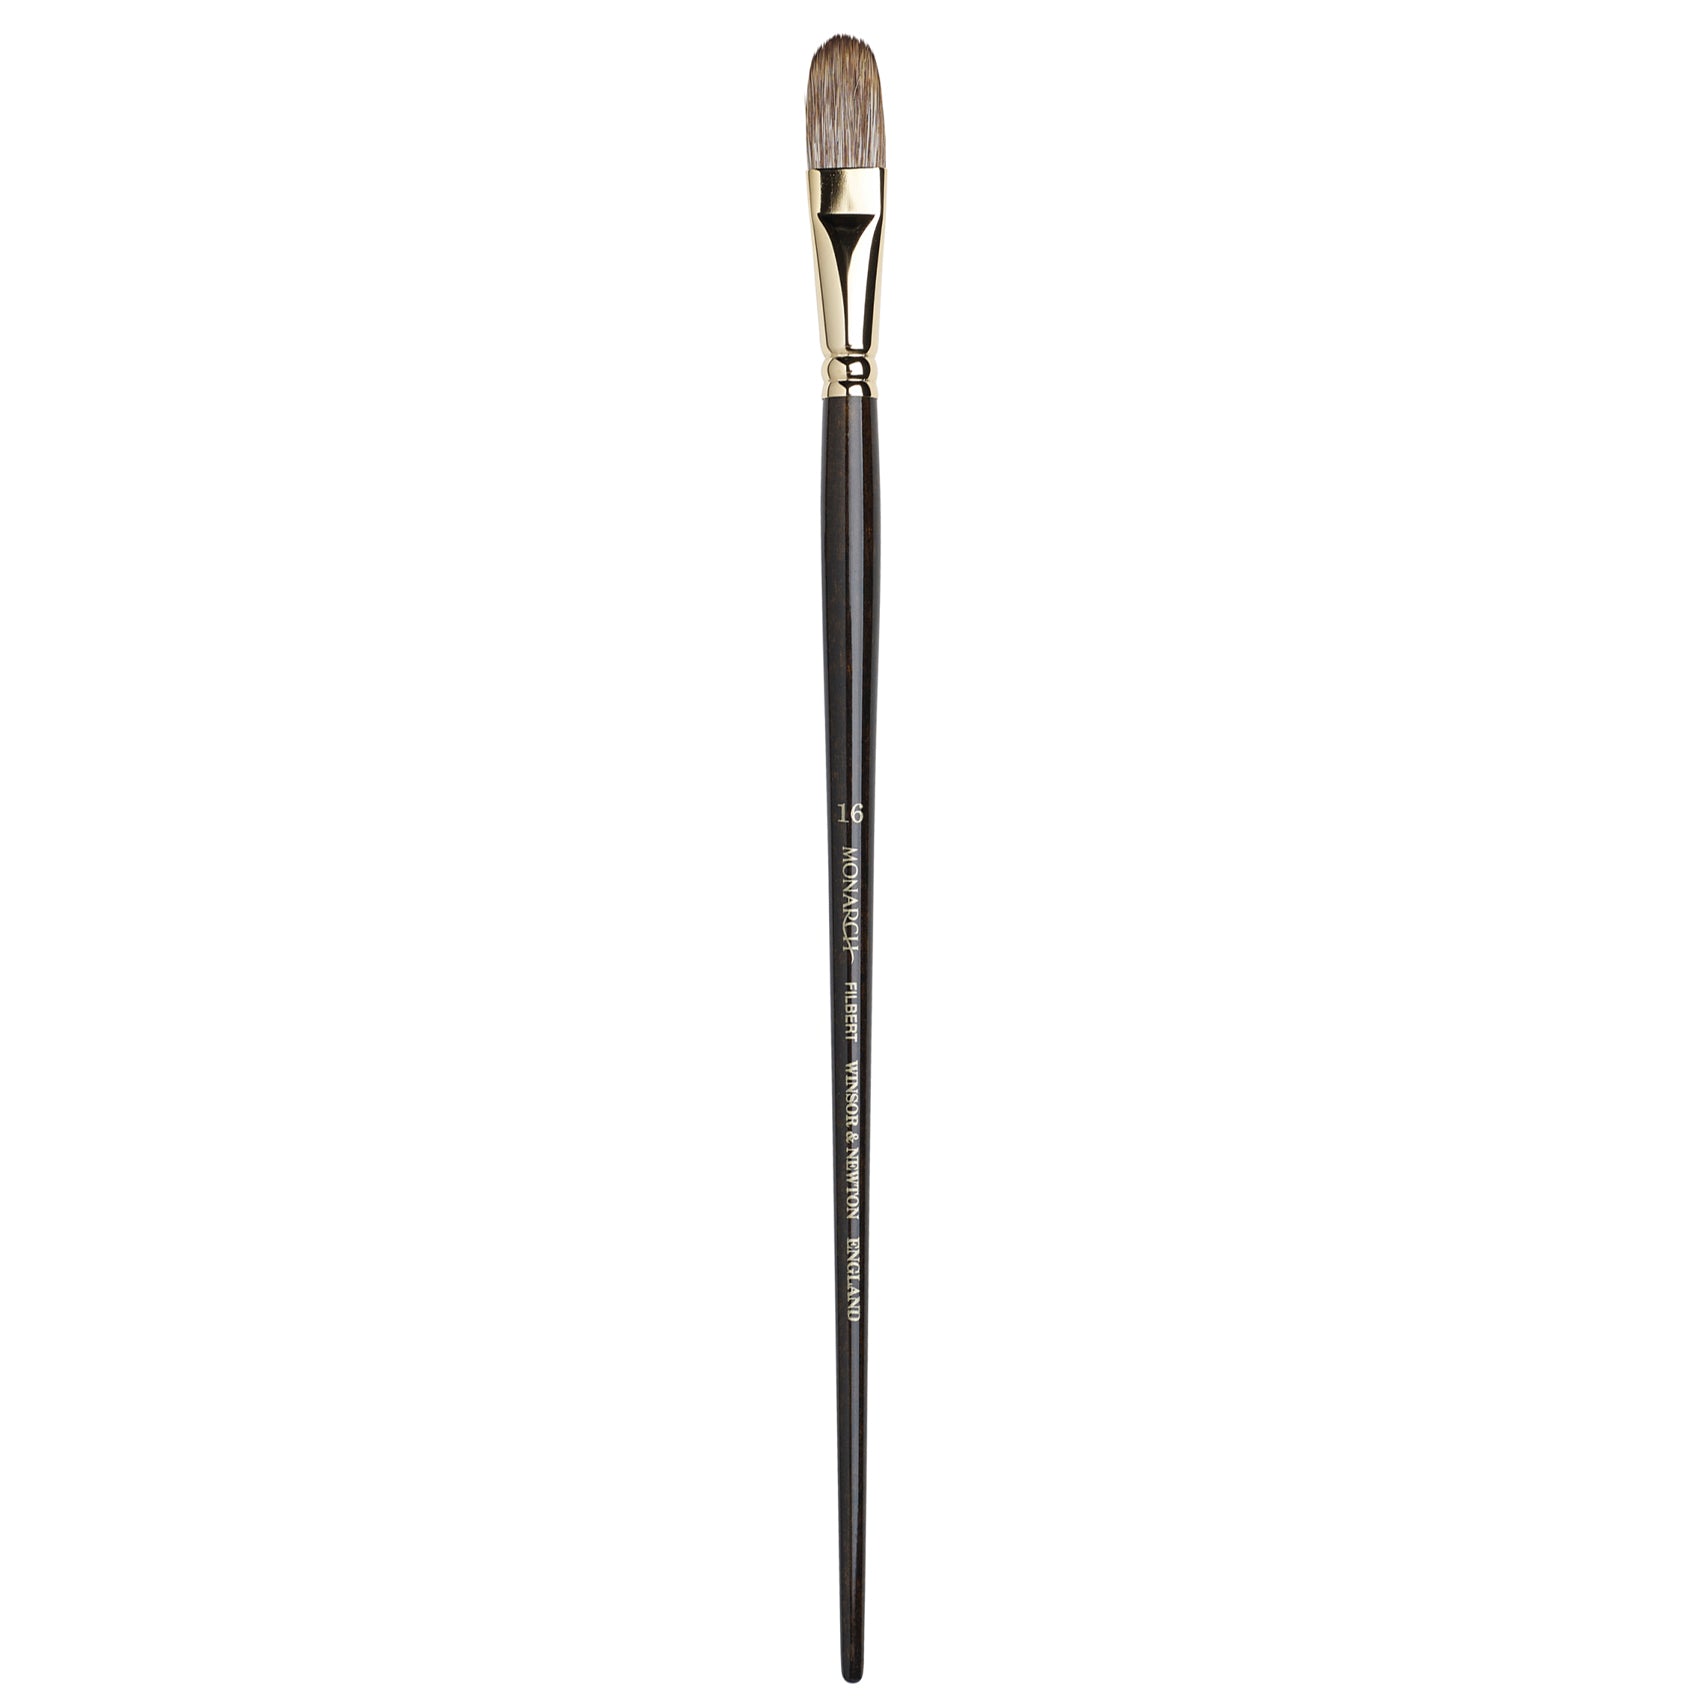 The Winsor & Newton Monarch Filbert brush boasts an oval shape that expertly combines the control of a short flat brush with the softer edges of a round brush. This professional-grade brush features synthetic hair that mimics the look and feel of natural Mongoose hair, which is now an endangered species. 